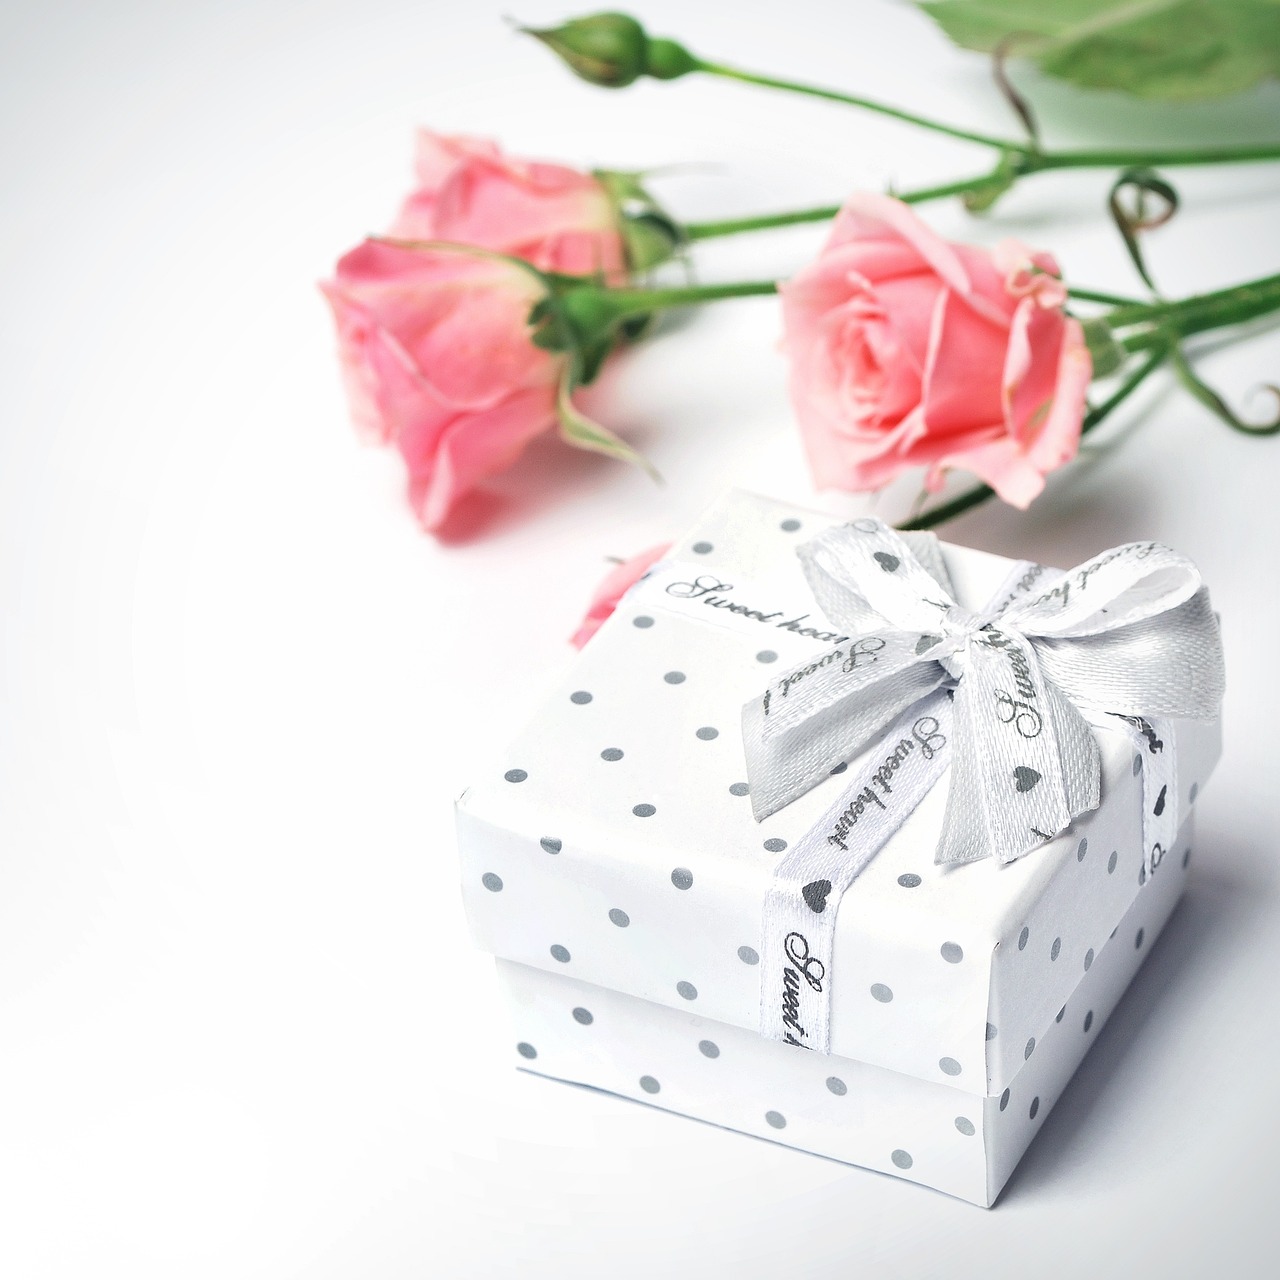 a white gift box sitting next to a pink rose, romanticism, silver jewelry, spots, high quality product image”